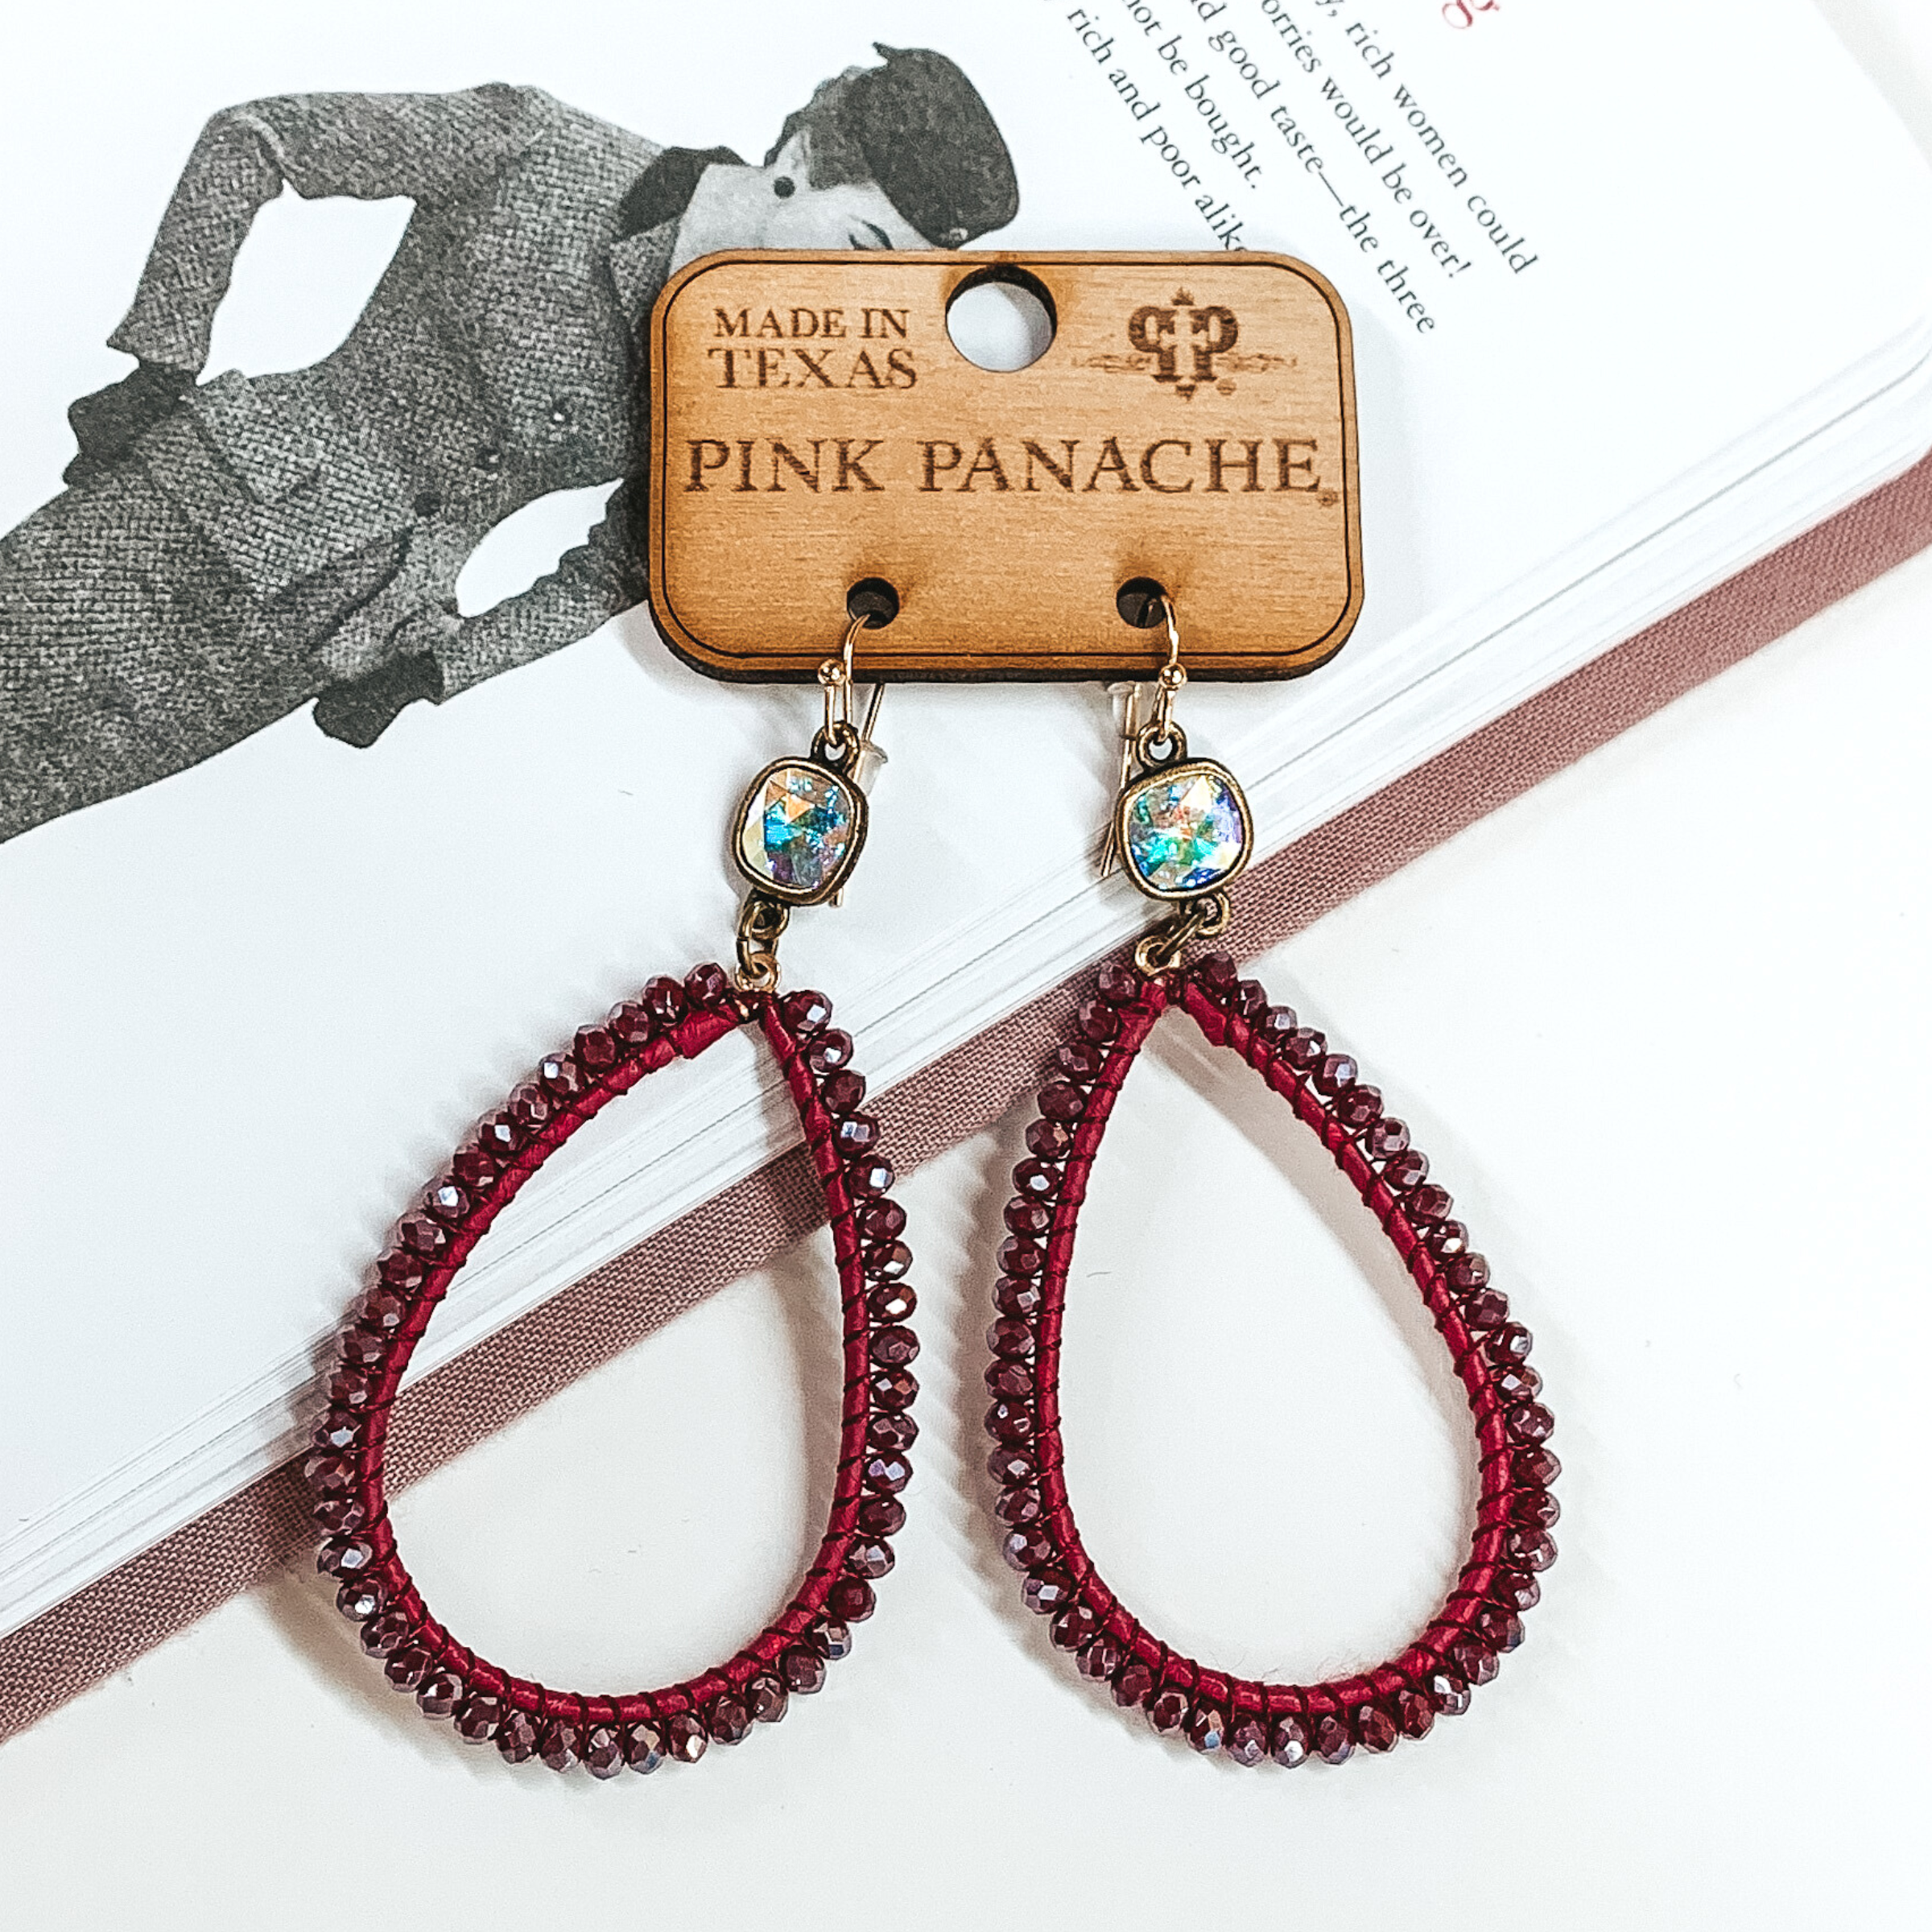 Pair of teardrop earrings. These earrings include gold fish hook earrings, ab cushion cut crystal connectors, and burgundy colored wrap and beads on the teardrop pendant. These earrings are pictured laying on an open book on a white background.